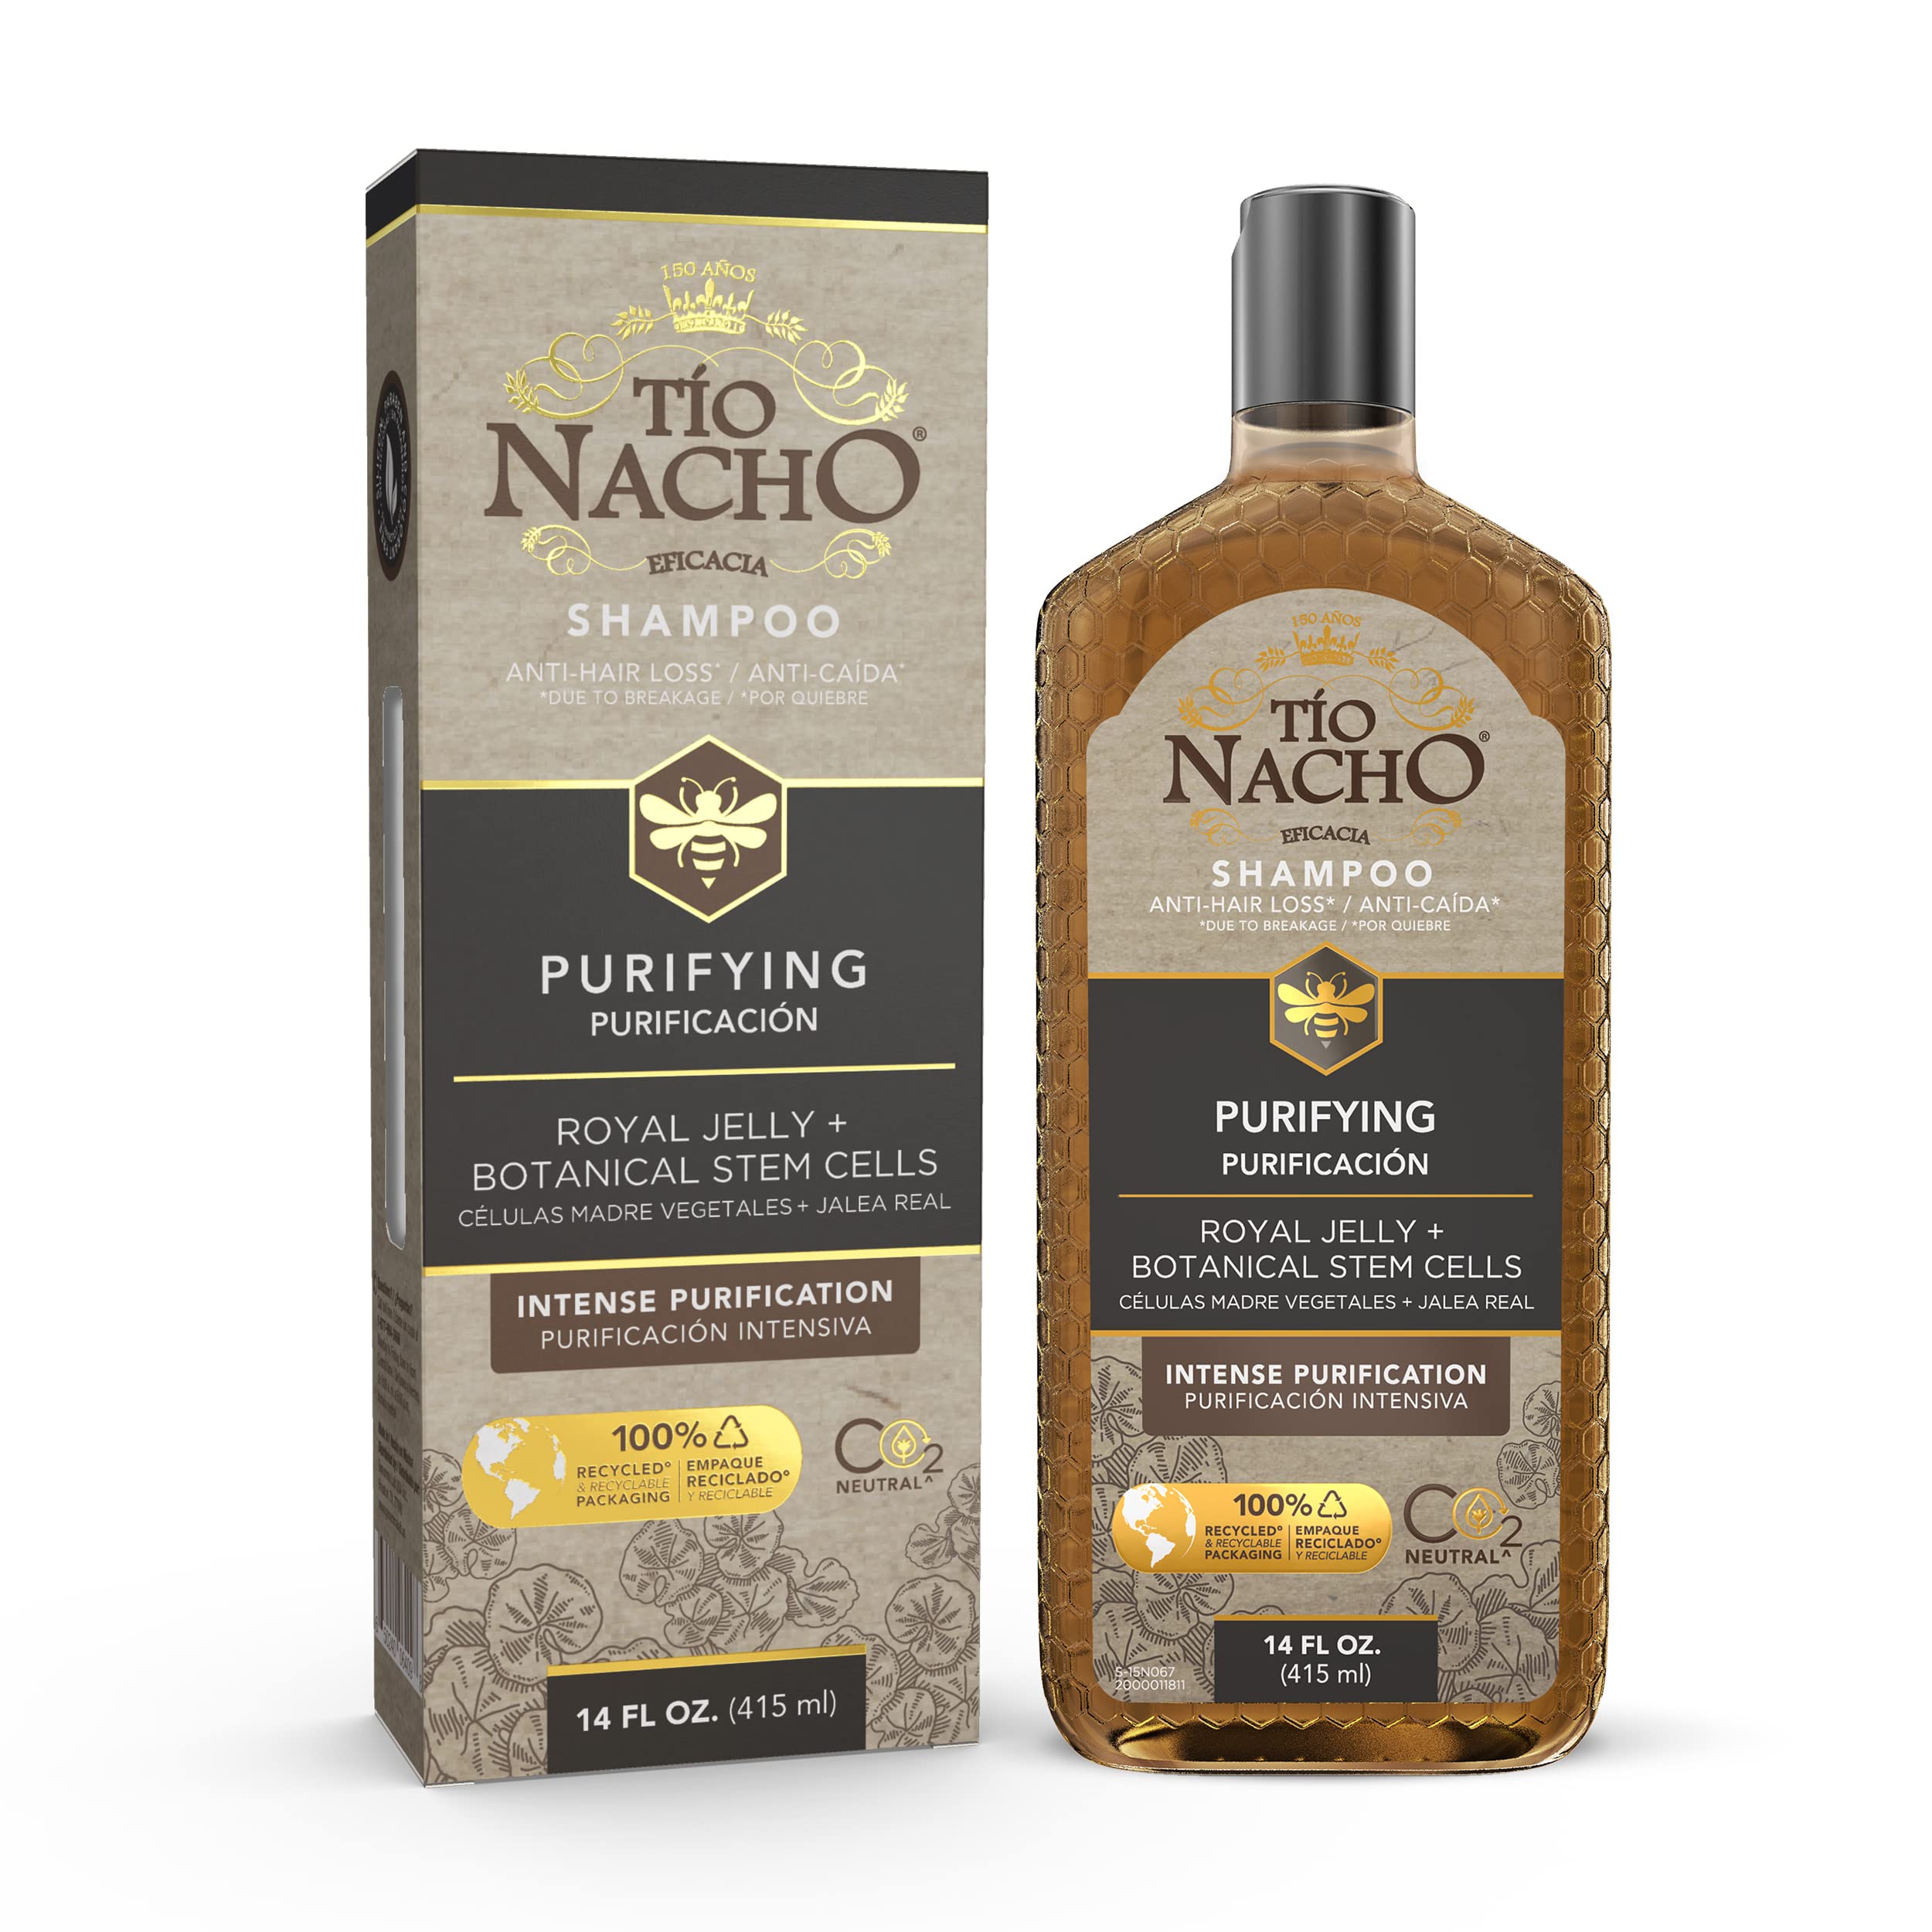 Tio Nacho Shampoo, Purifying with Royal Jelly, Infused with Botanical Stem Cells for Intense Hair and Scalp Purification + Detoxifying Balance, 14 Fluid Ounces